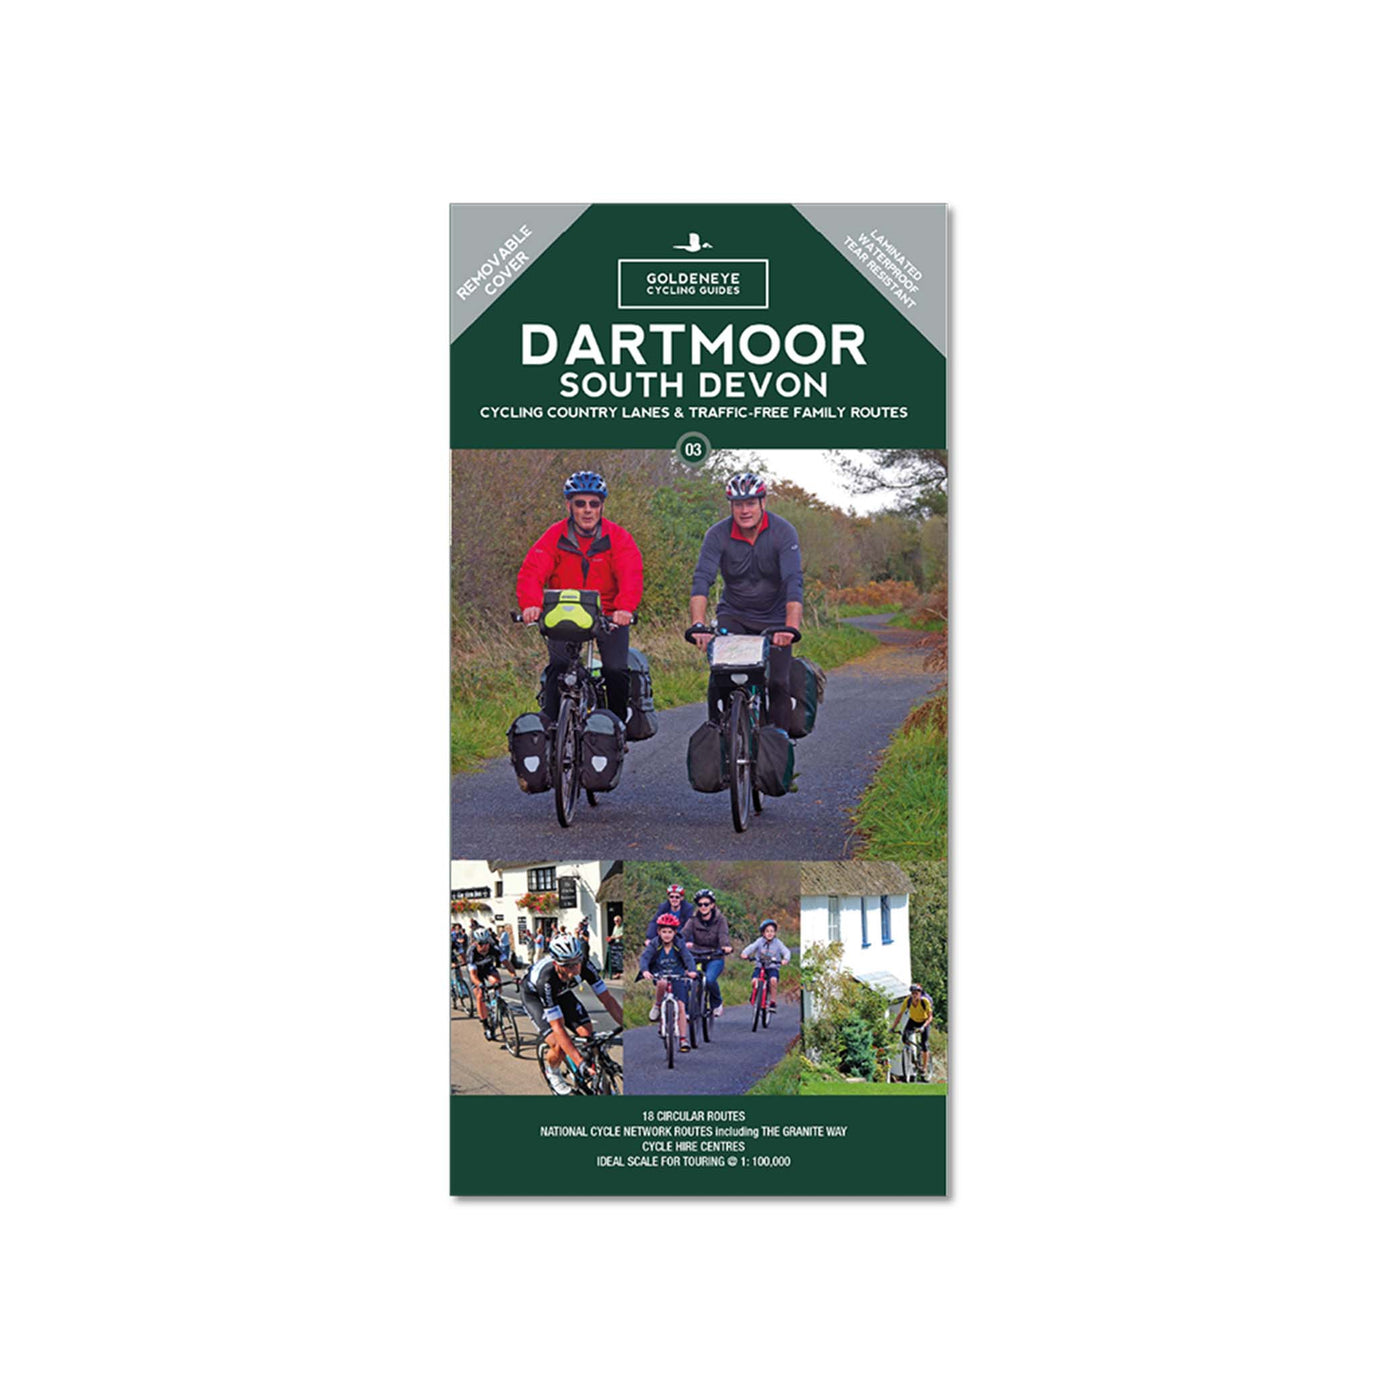 Goldeneye Guides: Dartmoor cycling country lanes